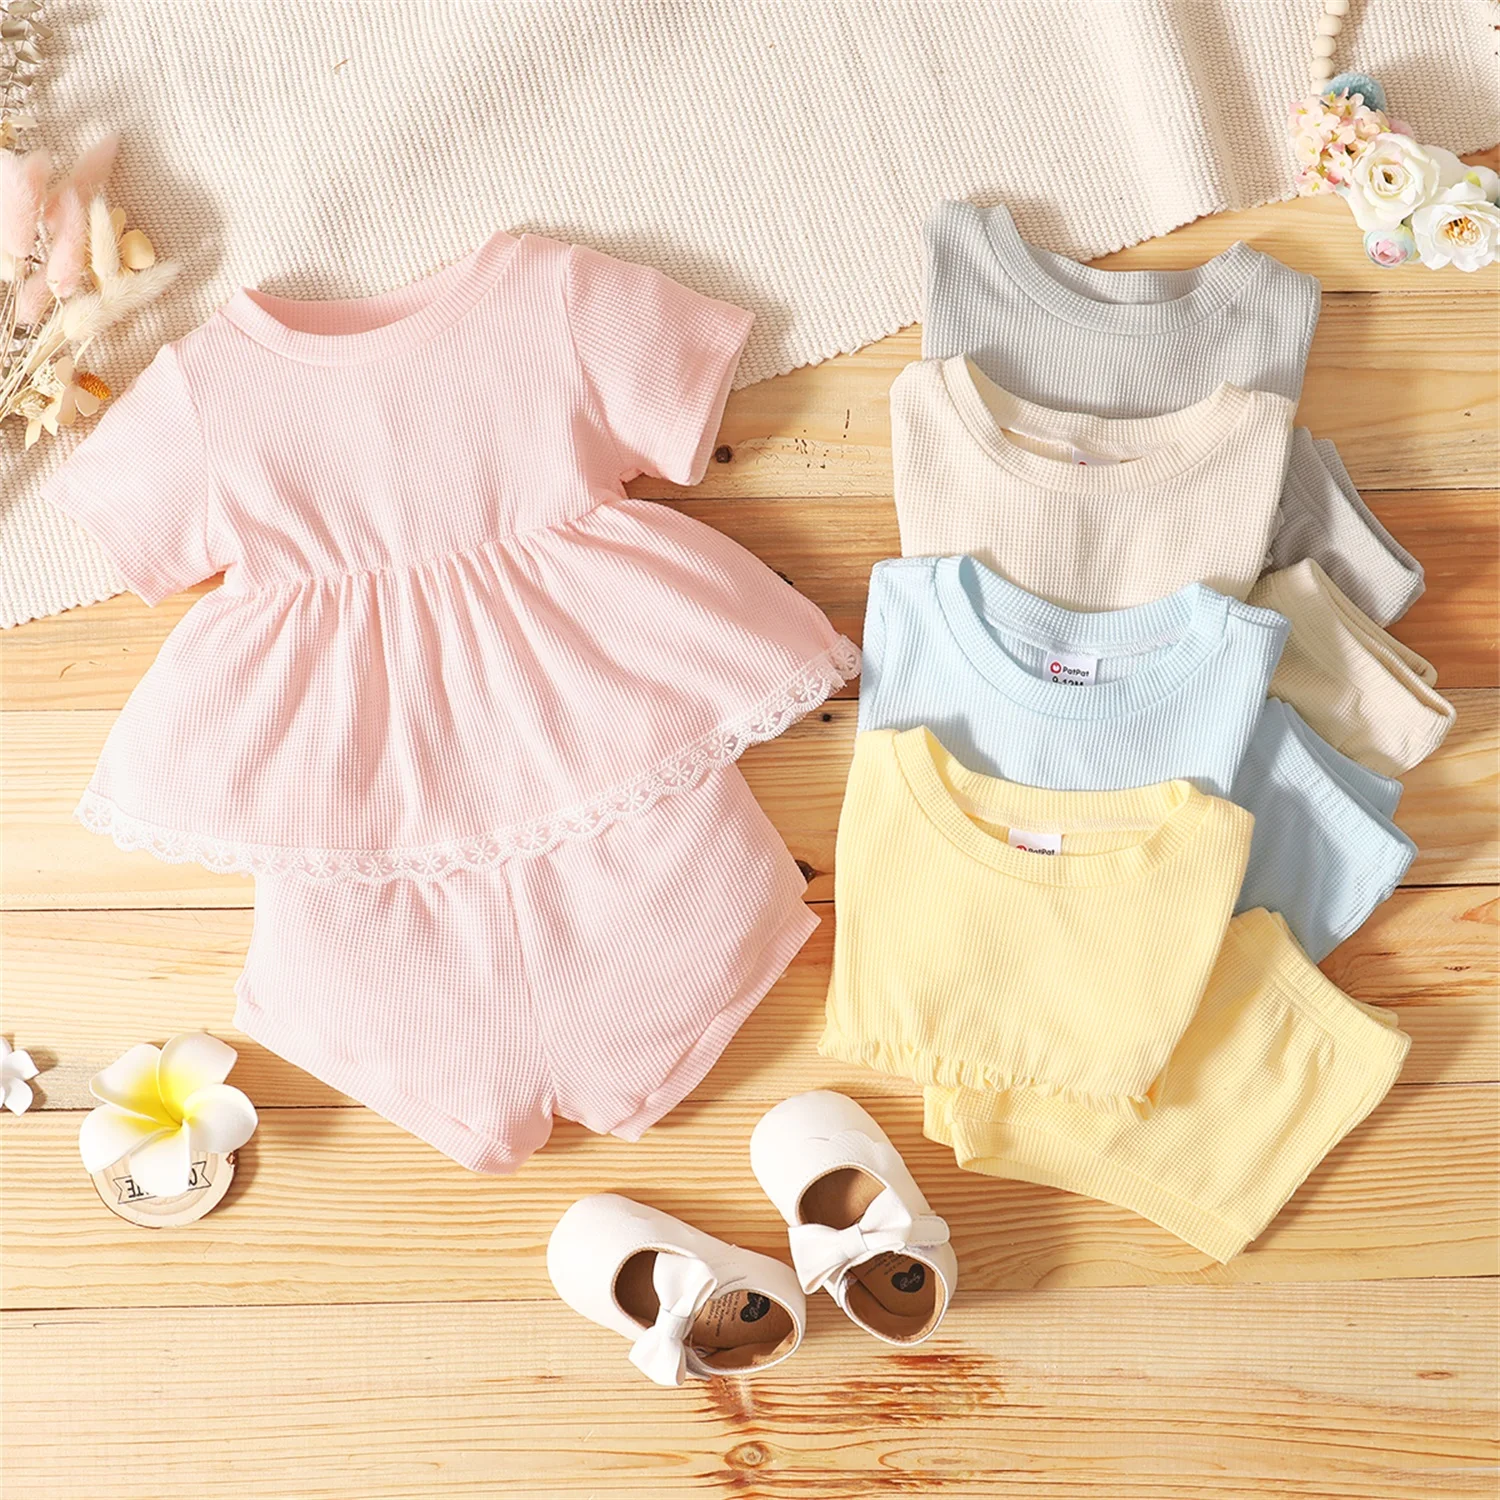 PatPat 2pcs Baby Girl Short-sleeve Flounced Solid Cotton Baby's Sets